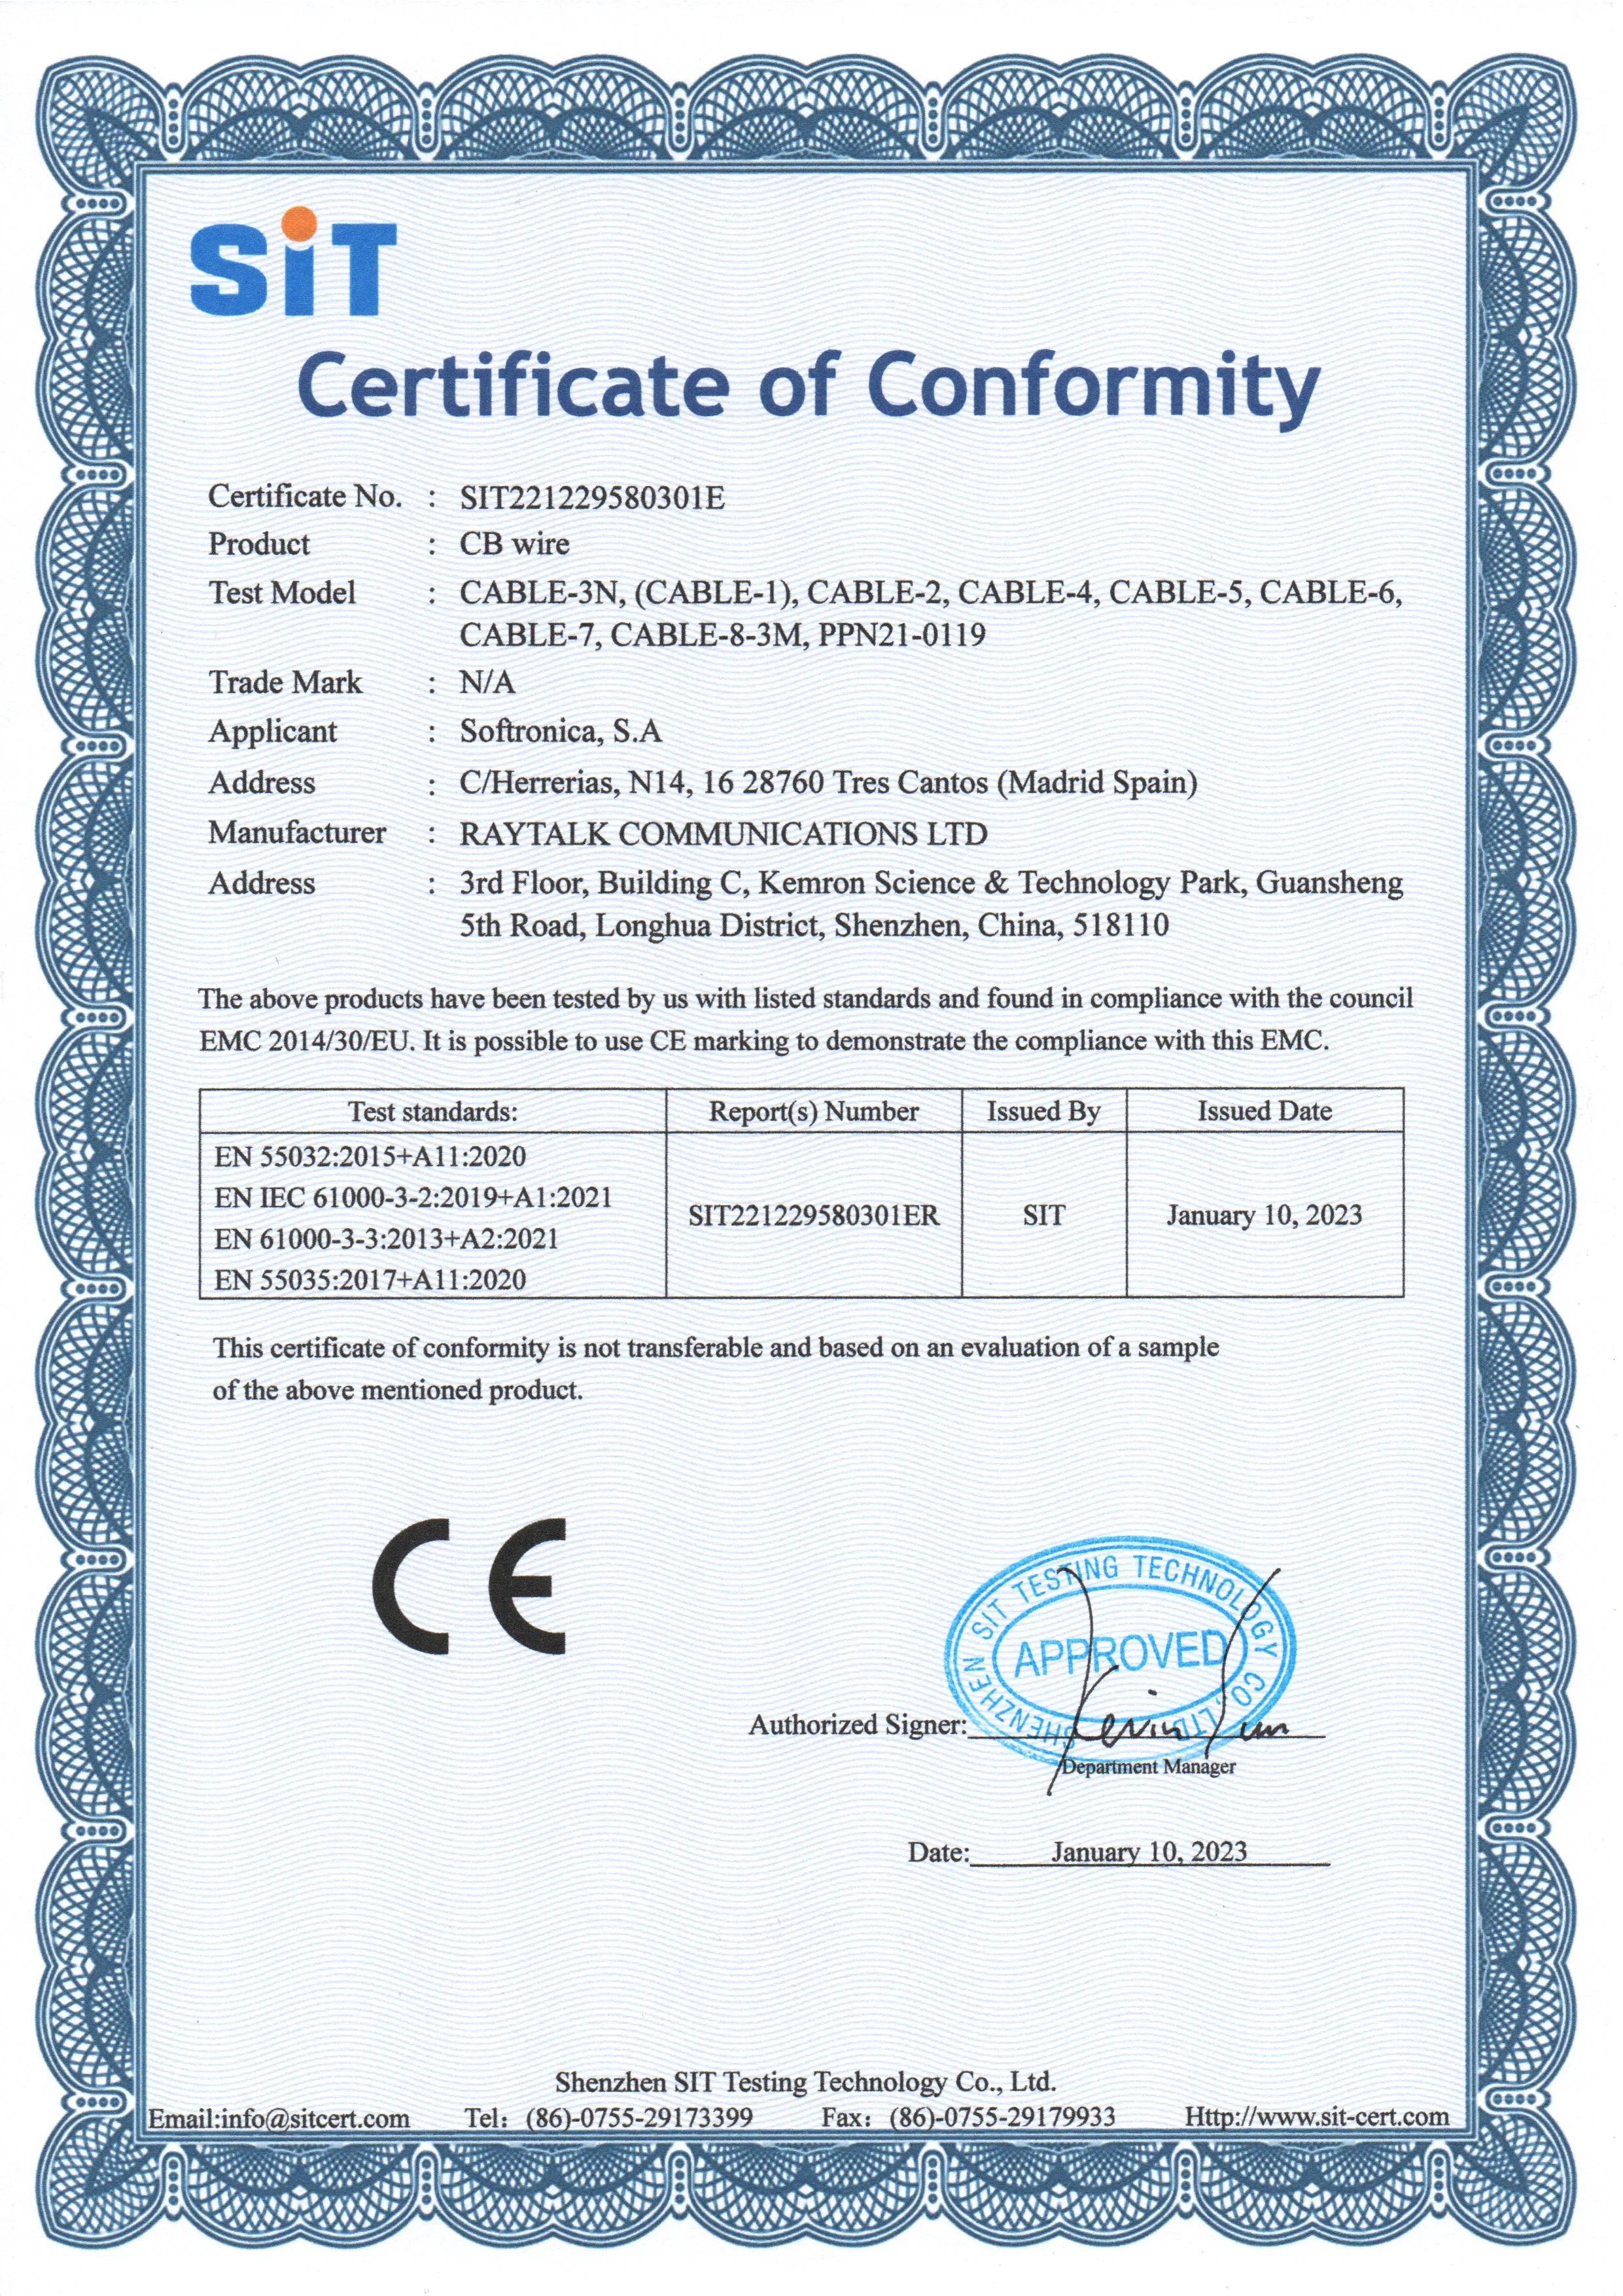 RAYTALK CB wire Certificate of Conformity